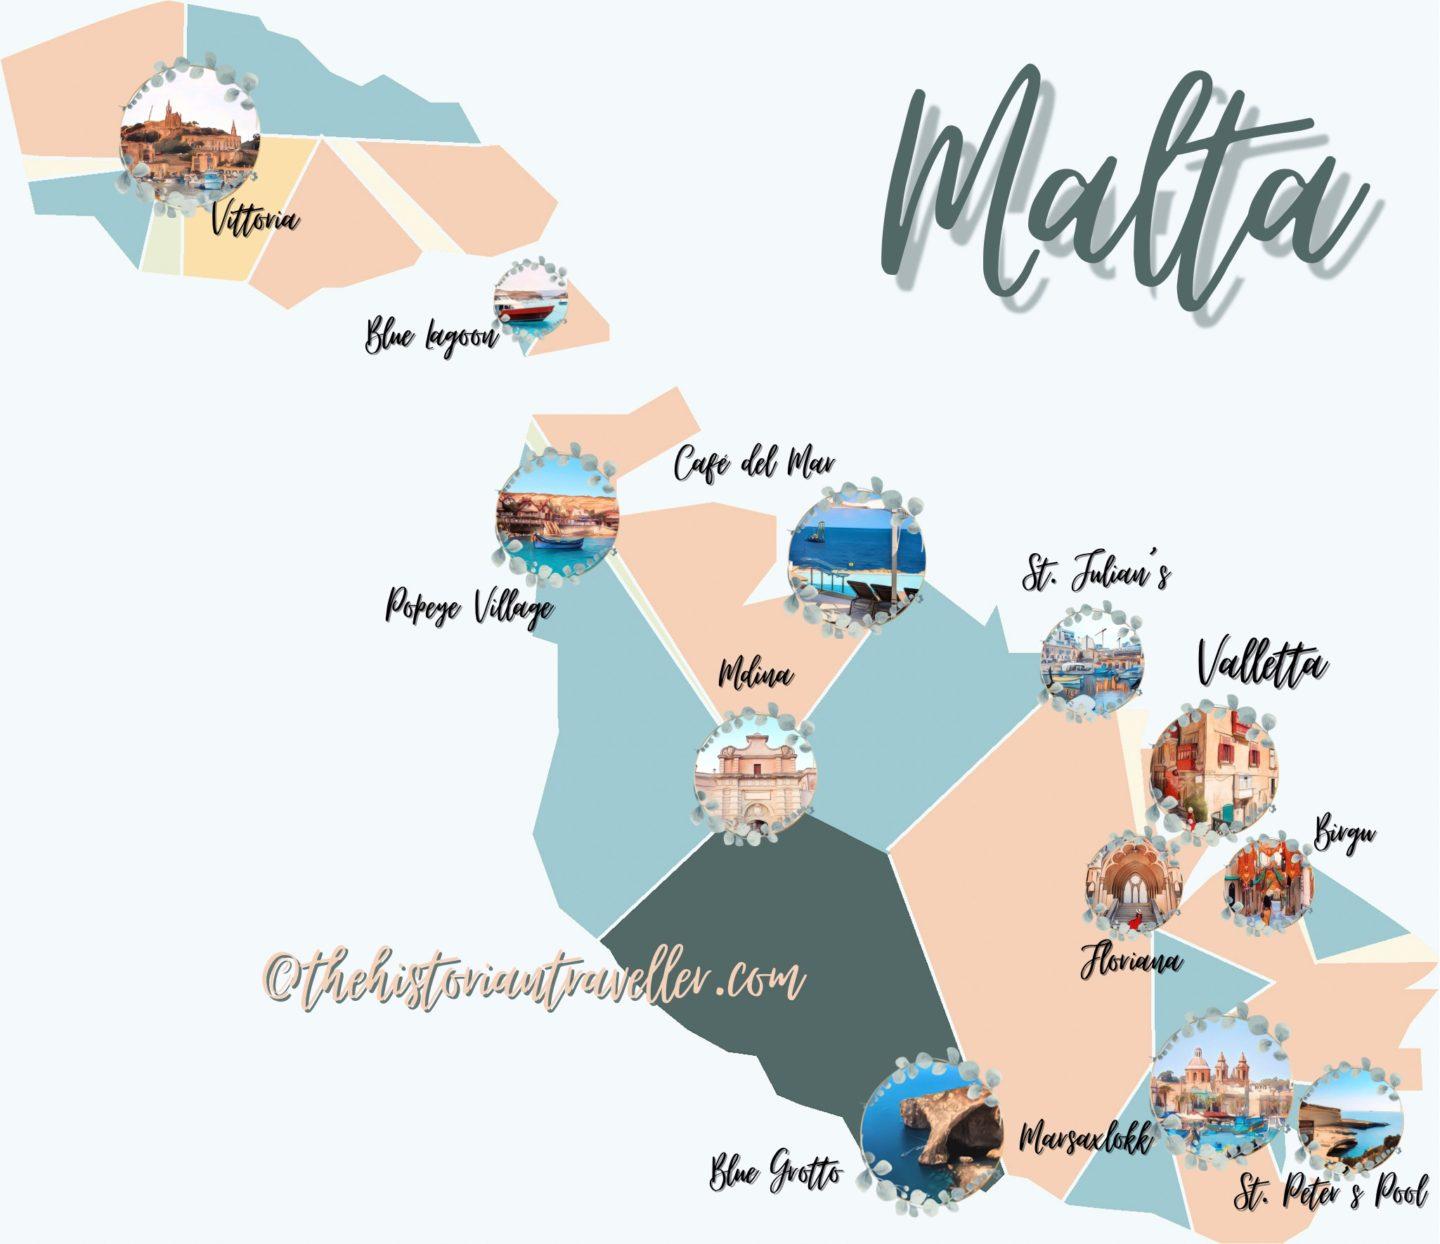 Illustrated map of Malta - Design by The Historian Traveller -Malta 6 days itinerary